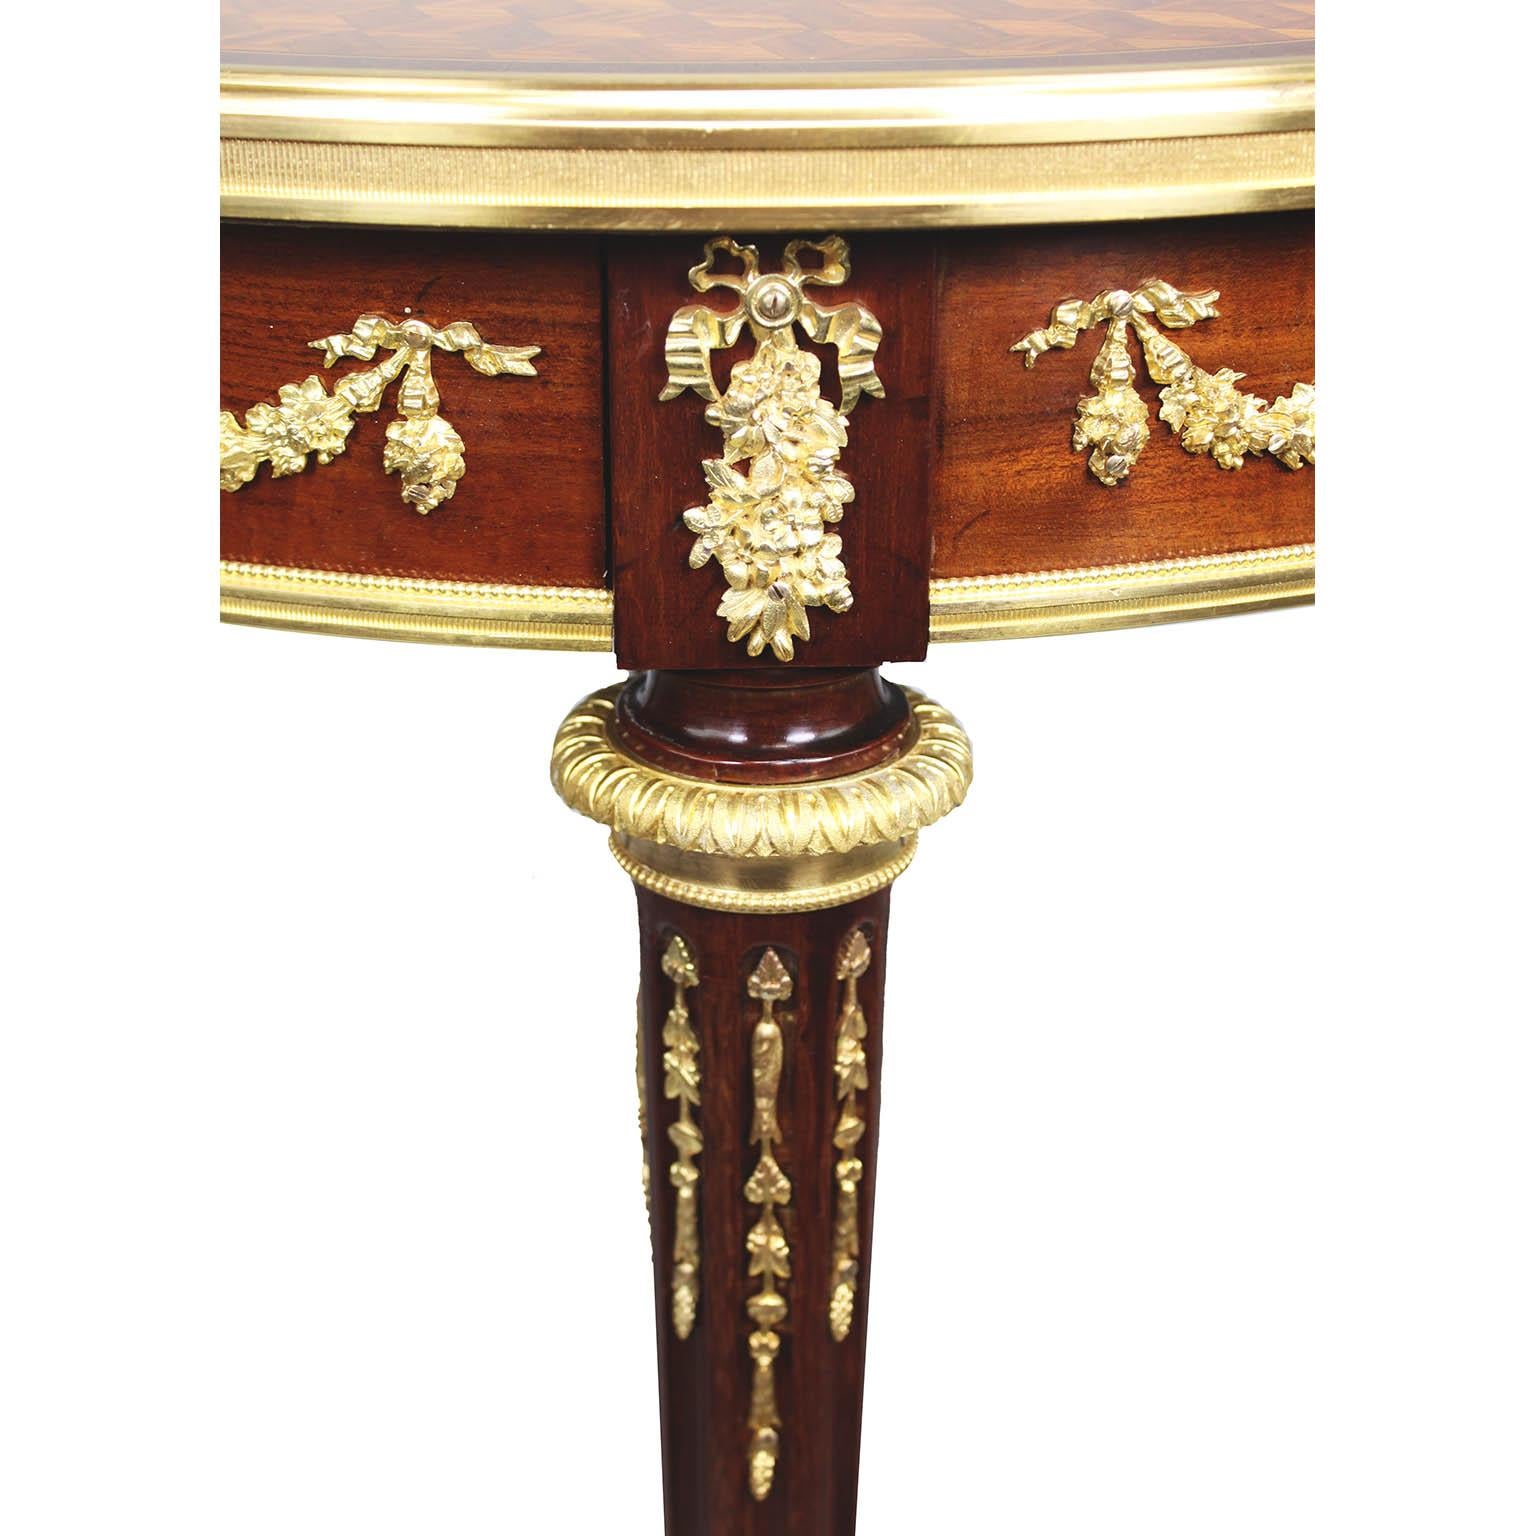 Tulipwood French Louis XV Style Ormolu & Parquetry Guéridon End Table by François Linke For Sale